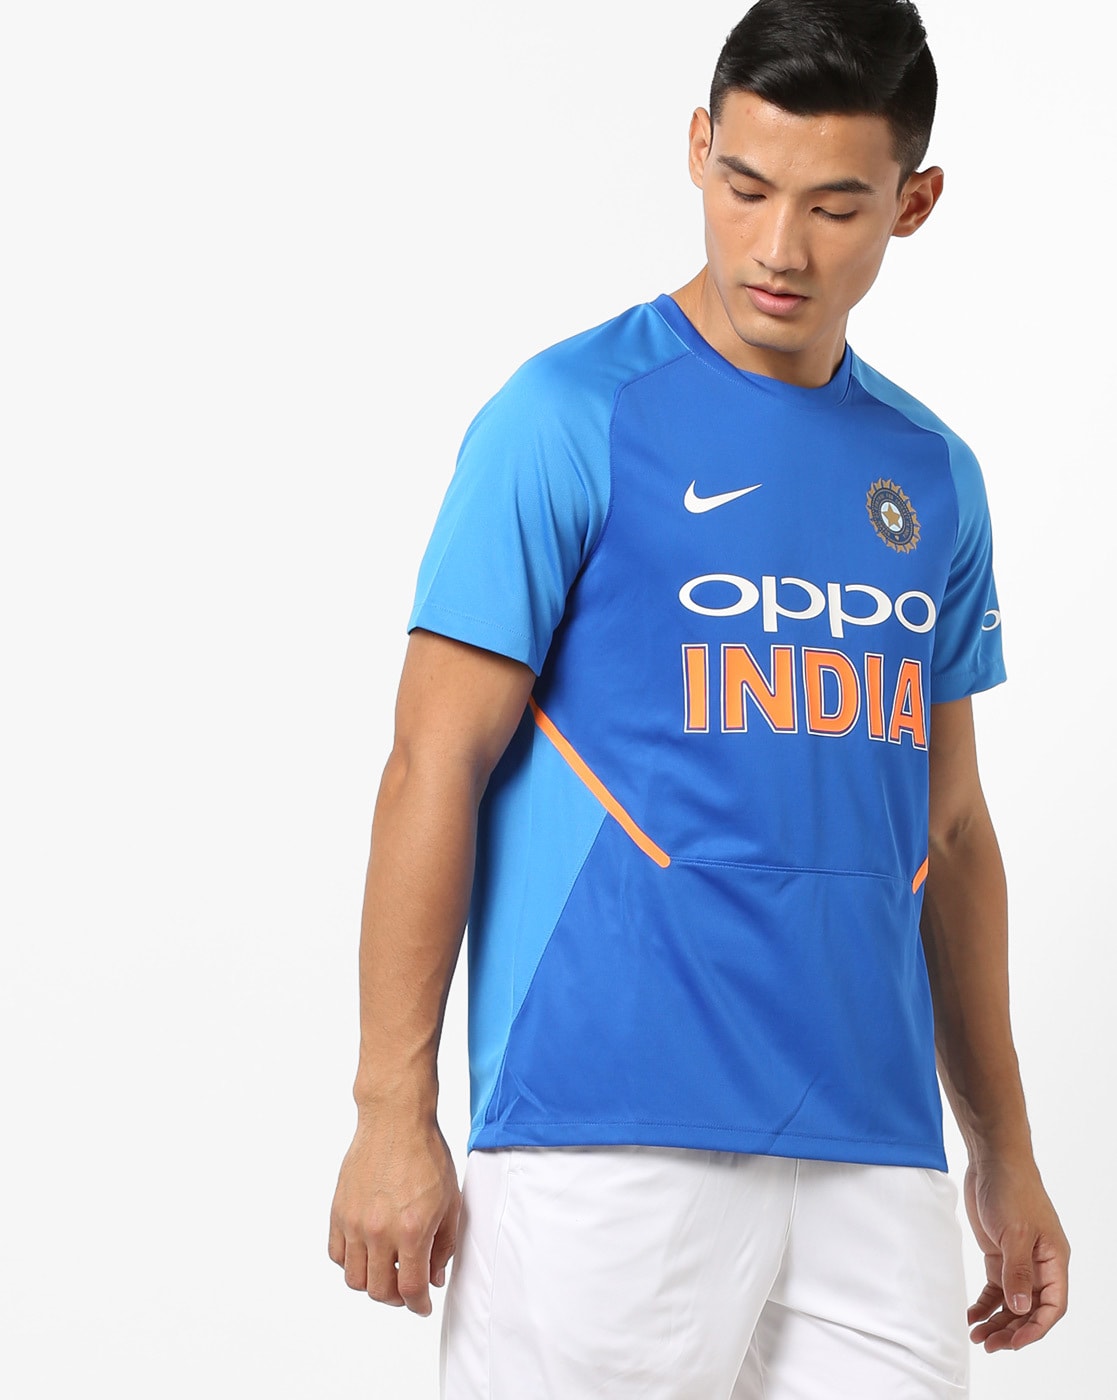 indian cricket jersey for children's